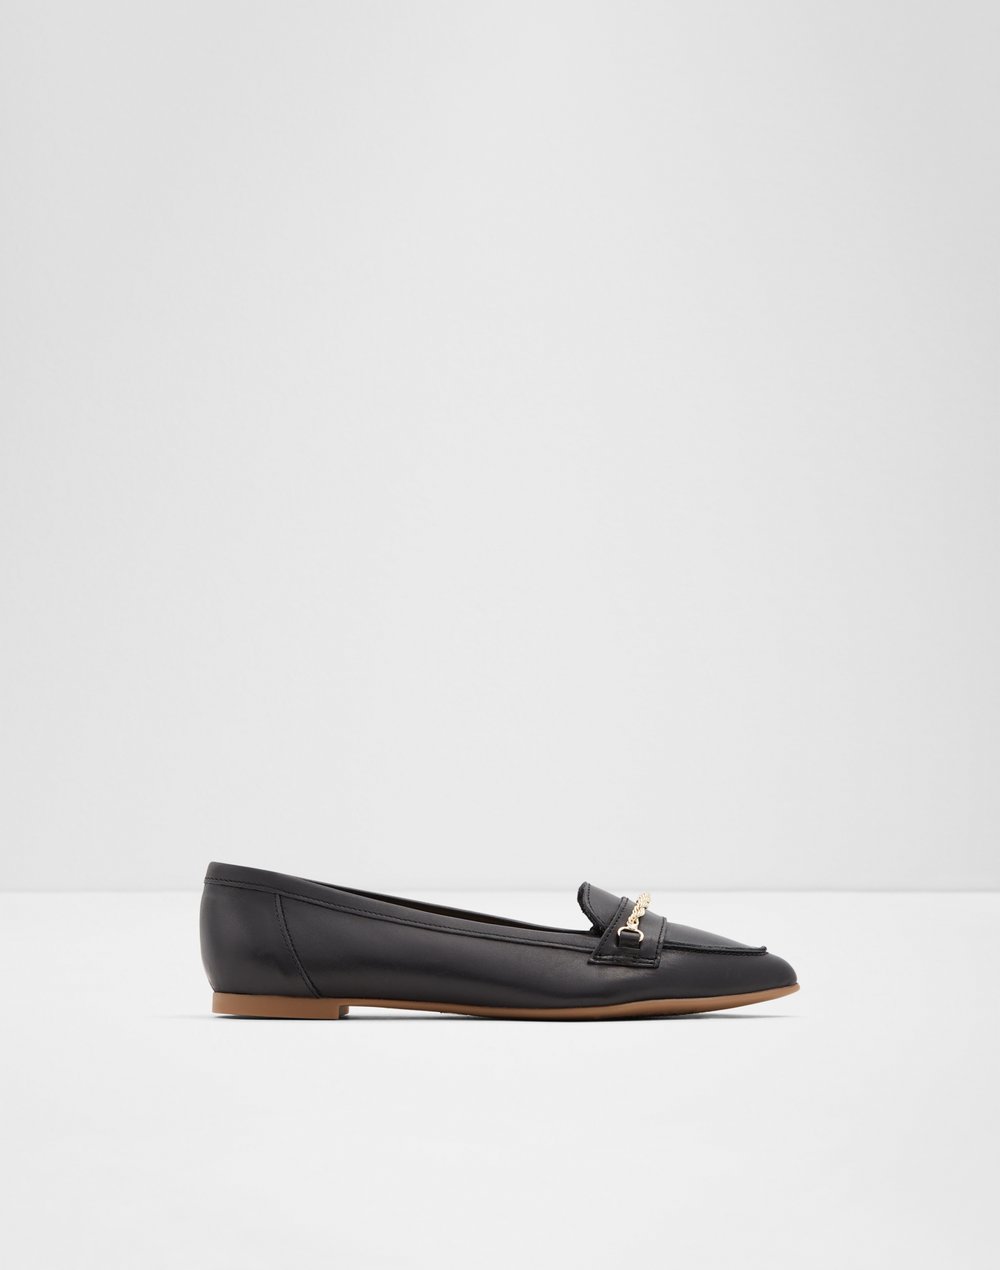 Ladie's Flats | Brogues And Loafers For Women | ALDO UK | ALDO UK